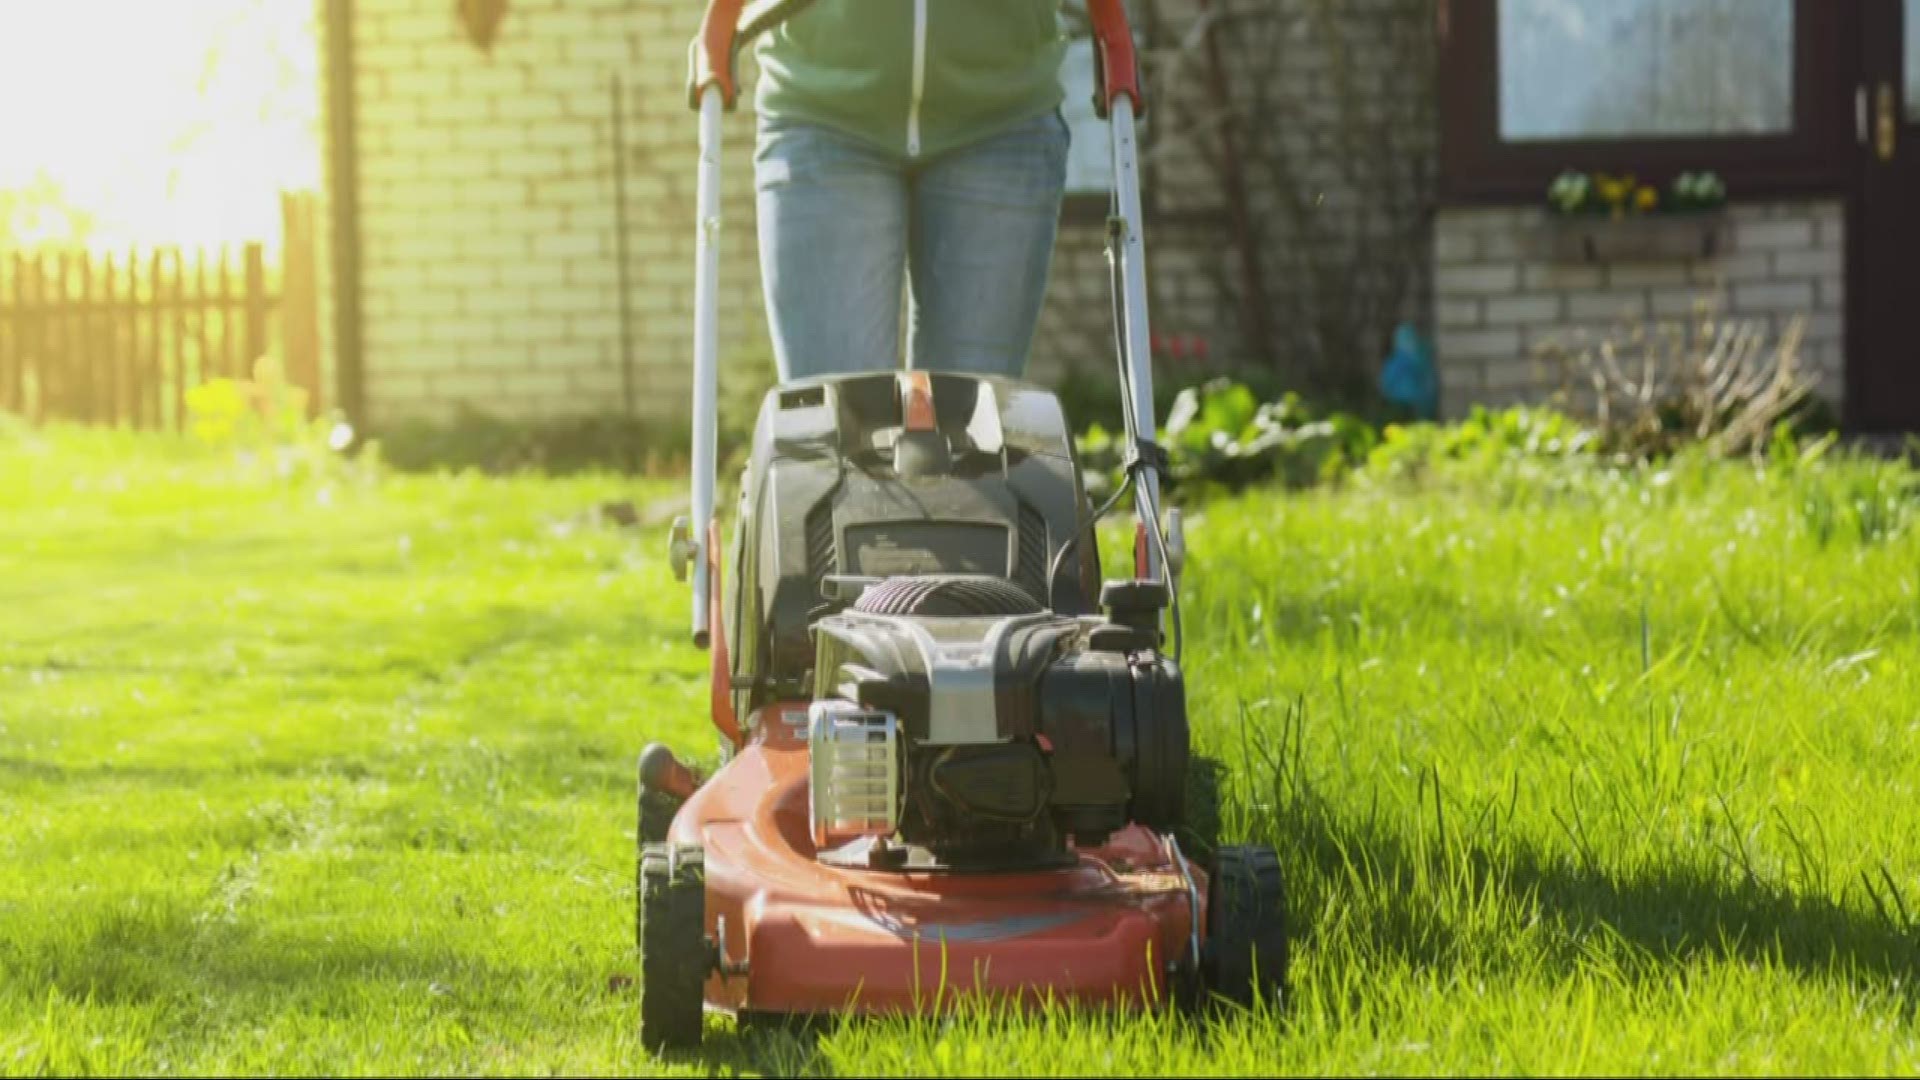 Forget dodgeball, flag football and soccer. There's one school in Iowa giving kids P.E. credit for students doing yard work for seniors or those with disabilities.